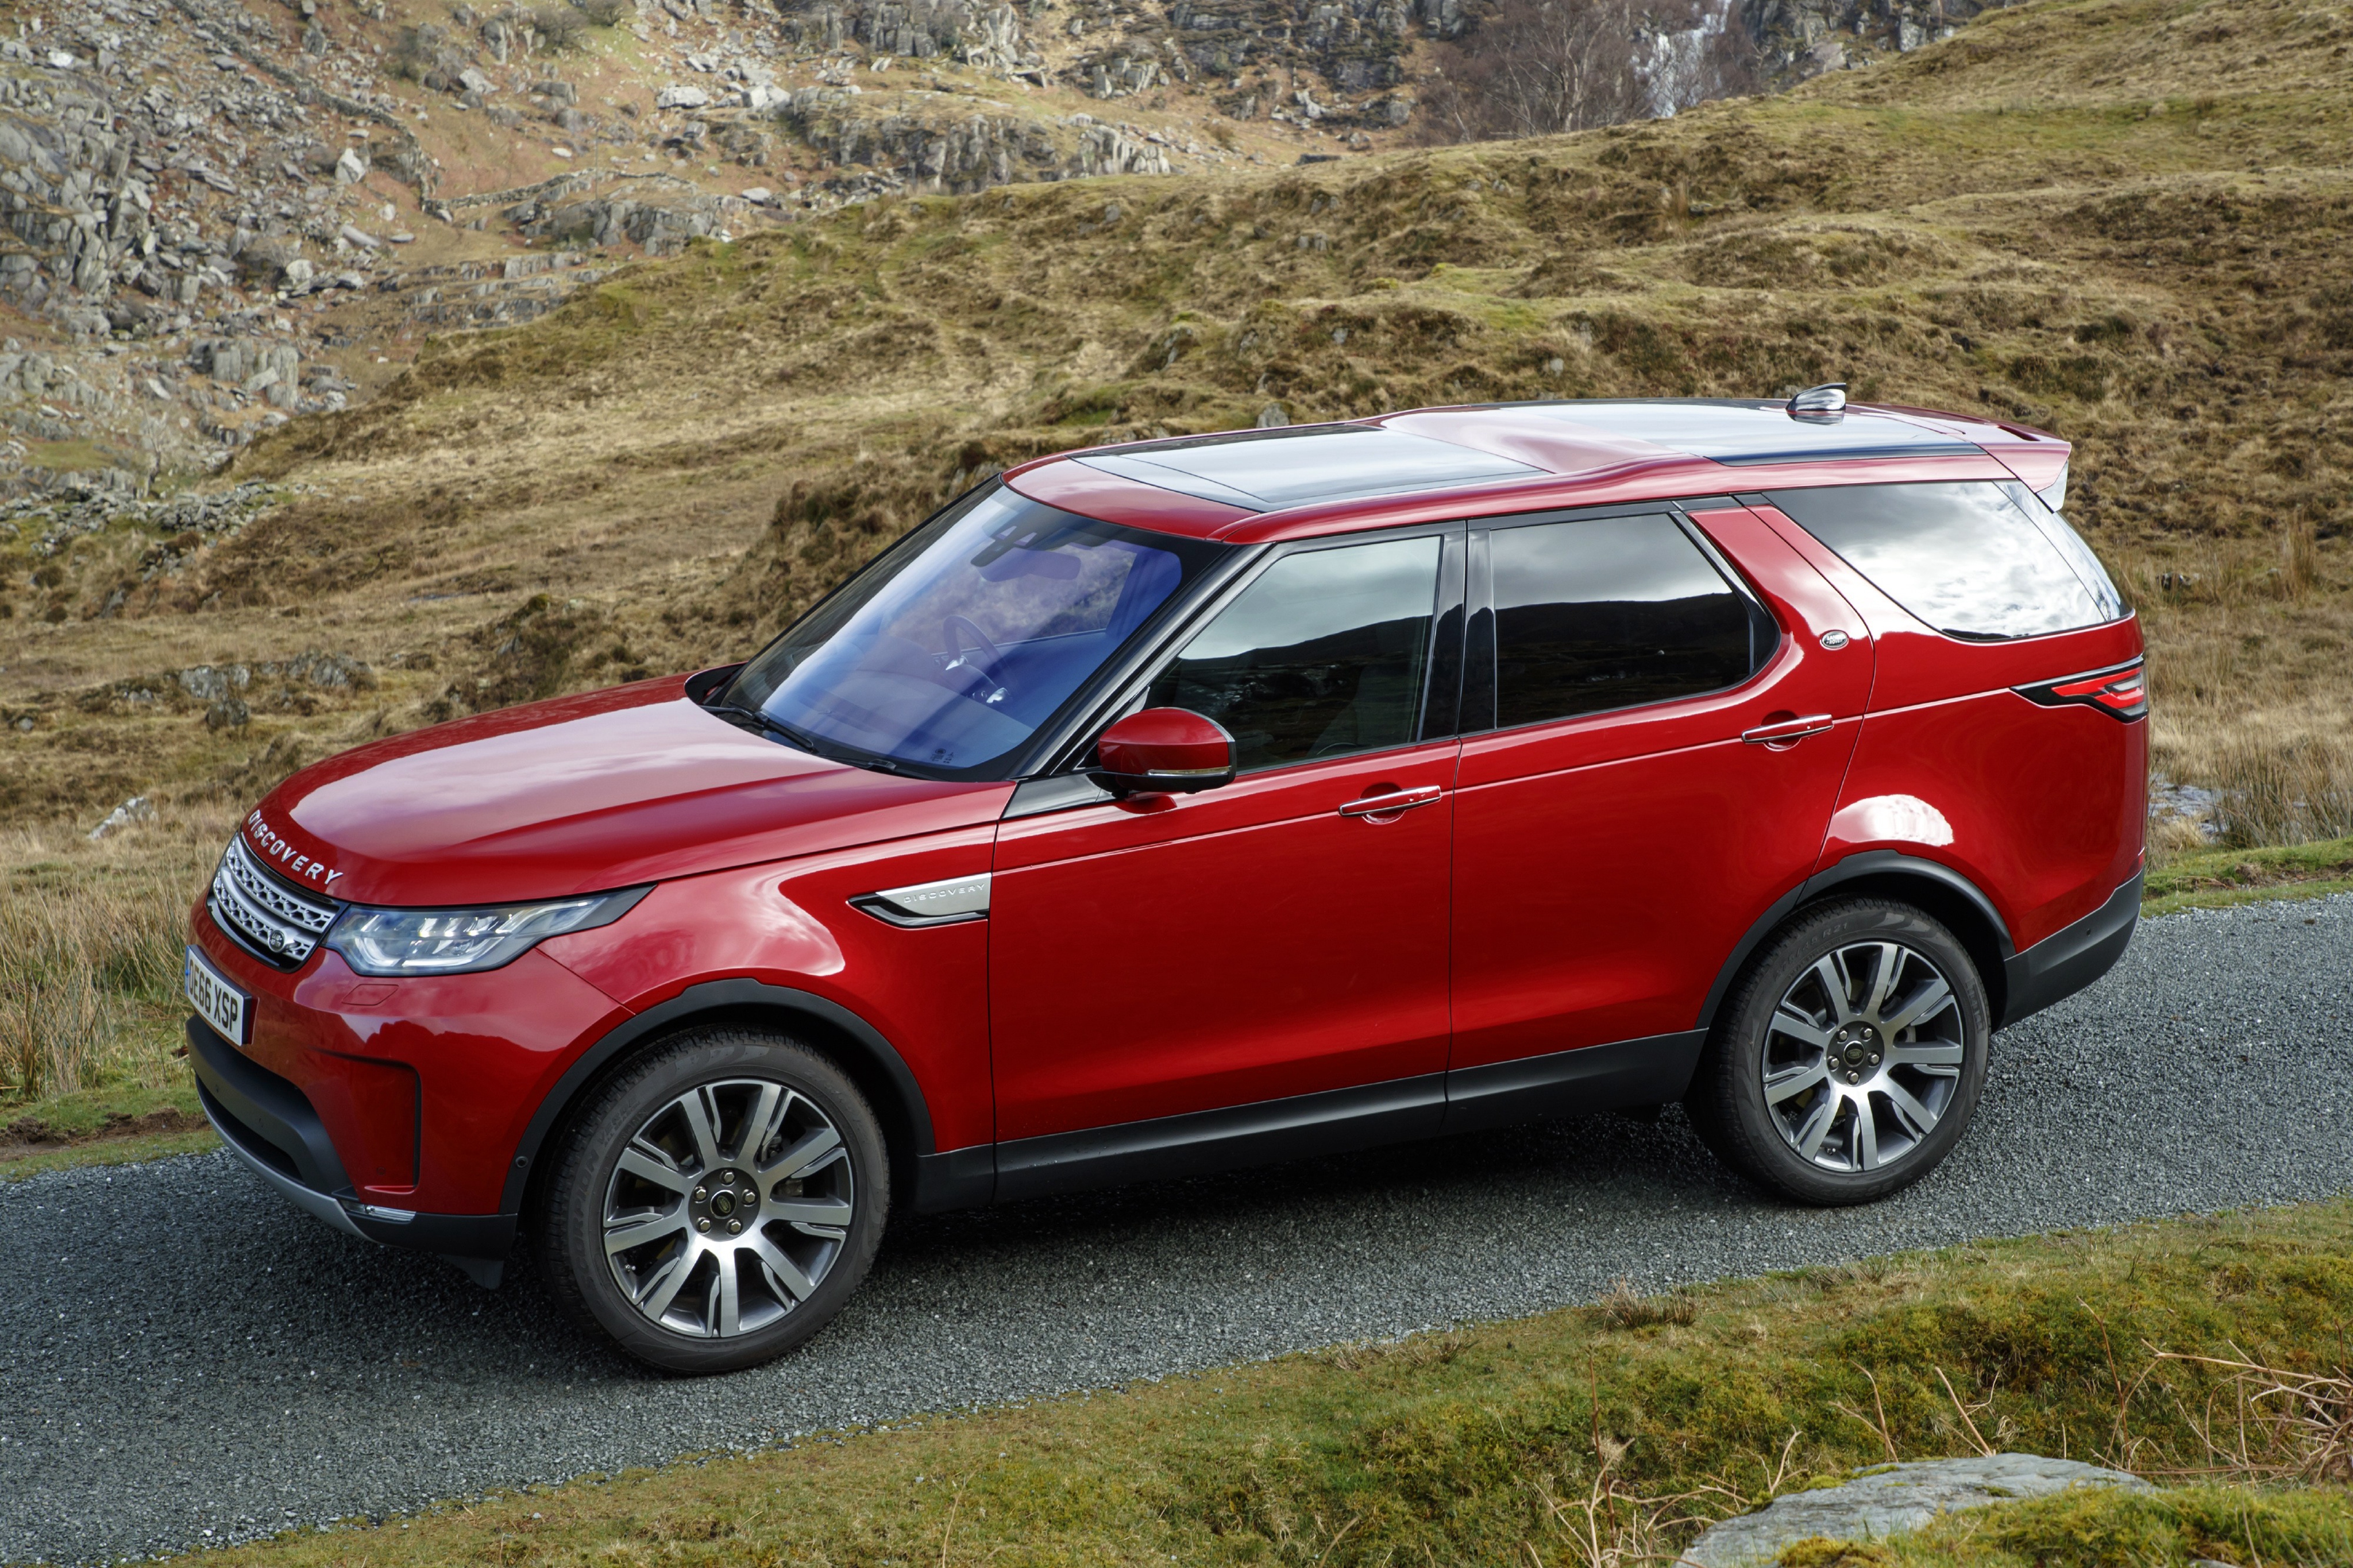 land rover discovery, vehicles, car, land rover, suv iphone wallpaper